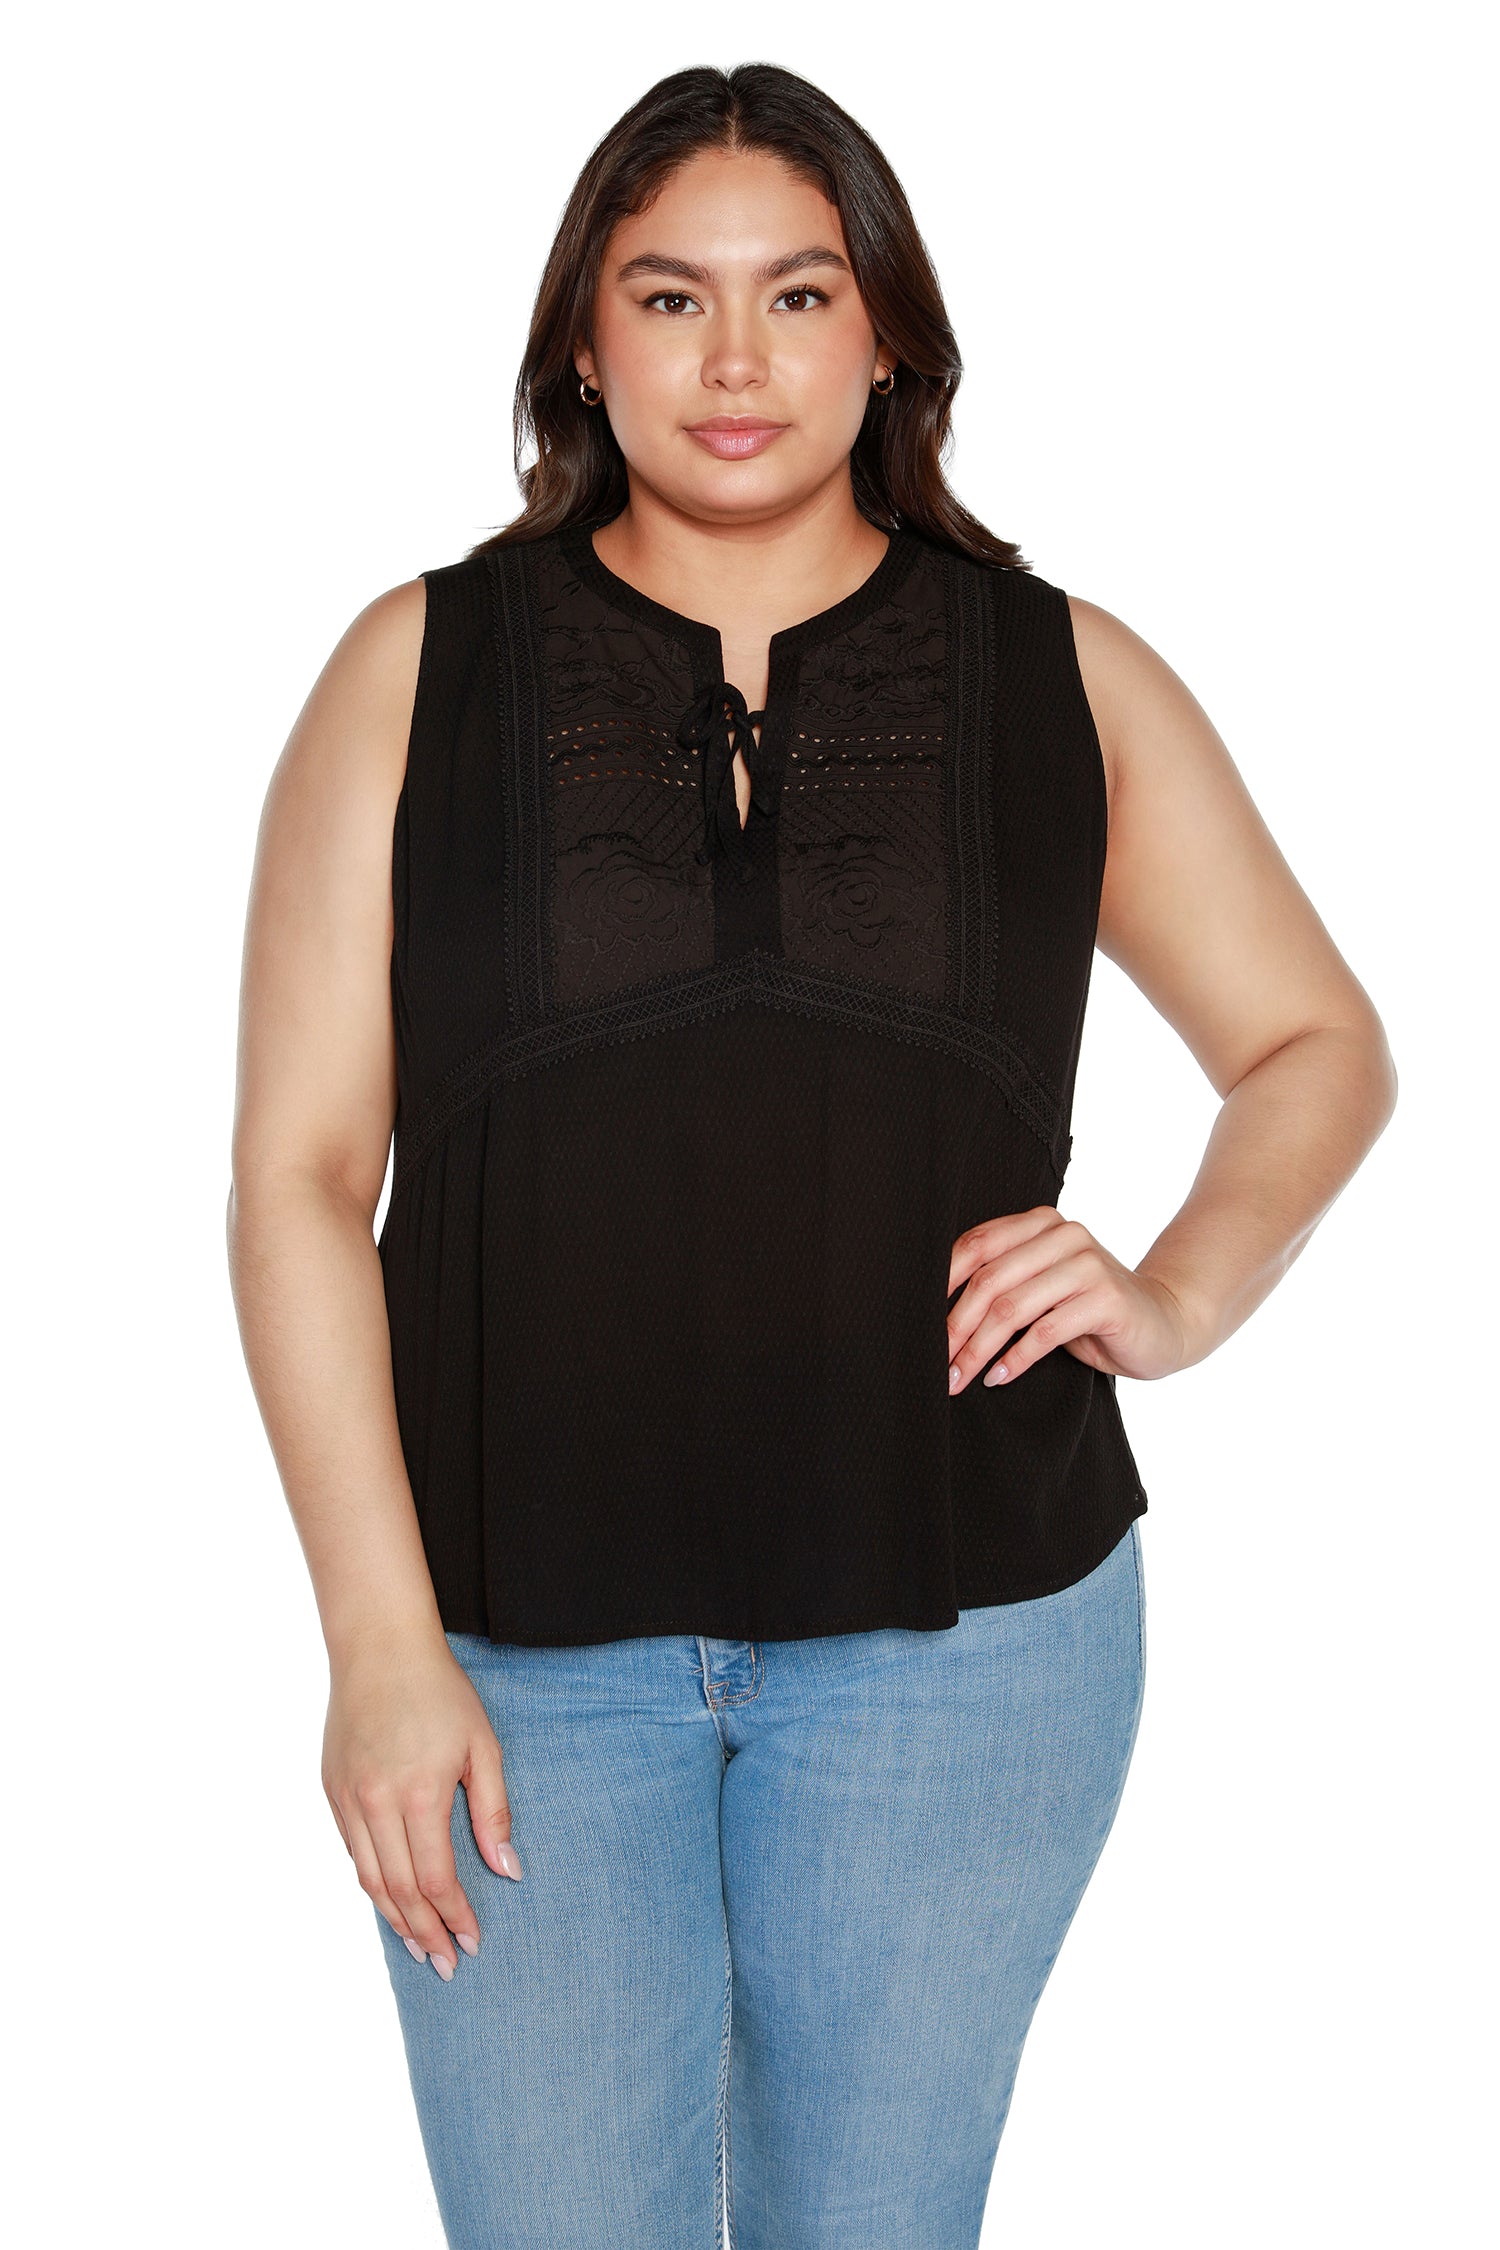 Women’s Sleeveless Woven Top with Eyelet Lace and Embroidery | Curvy